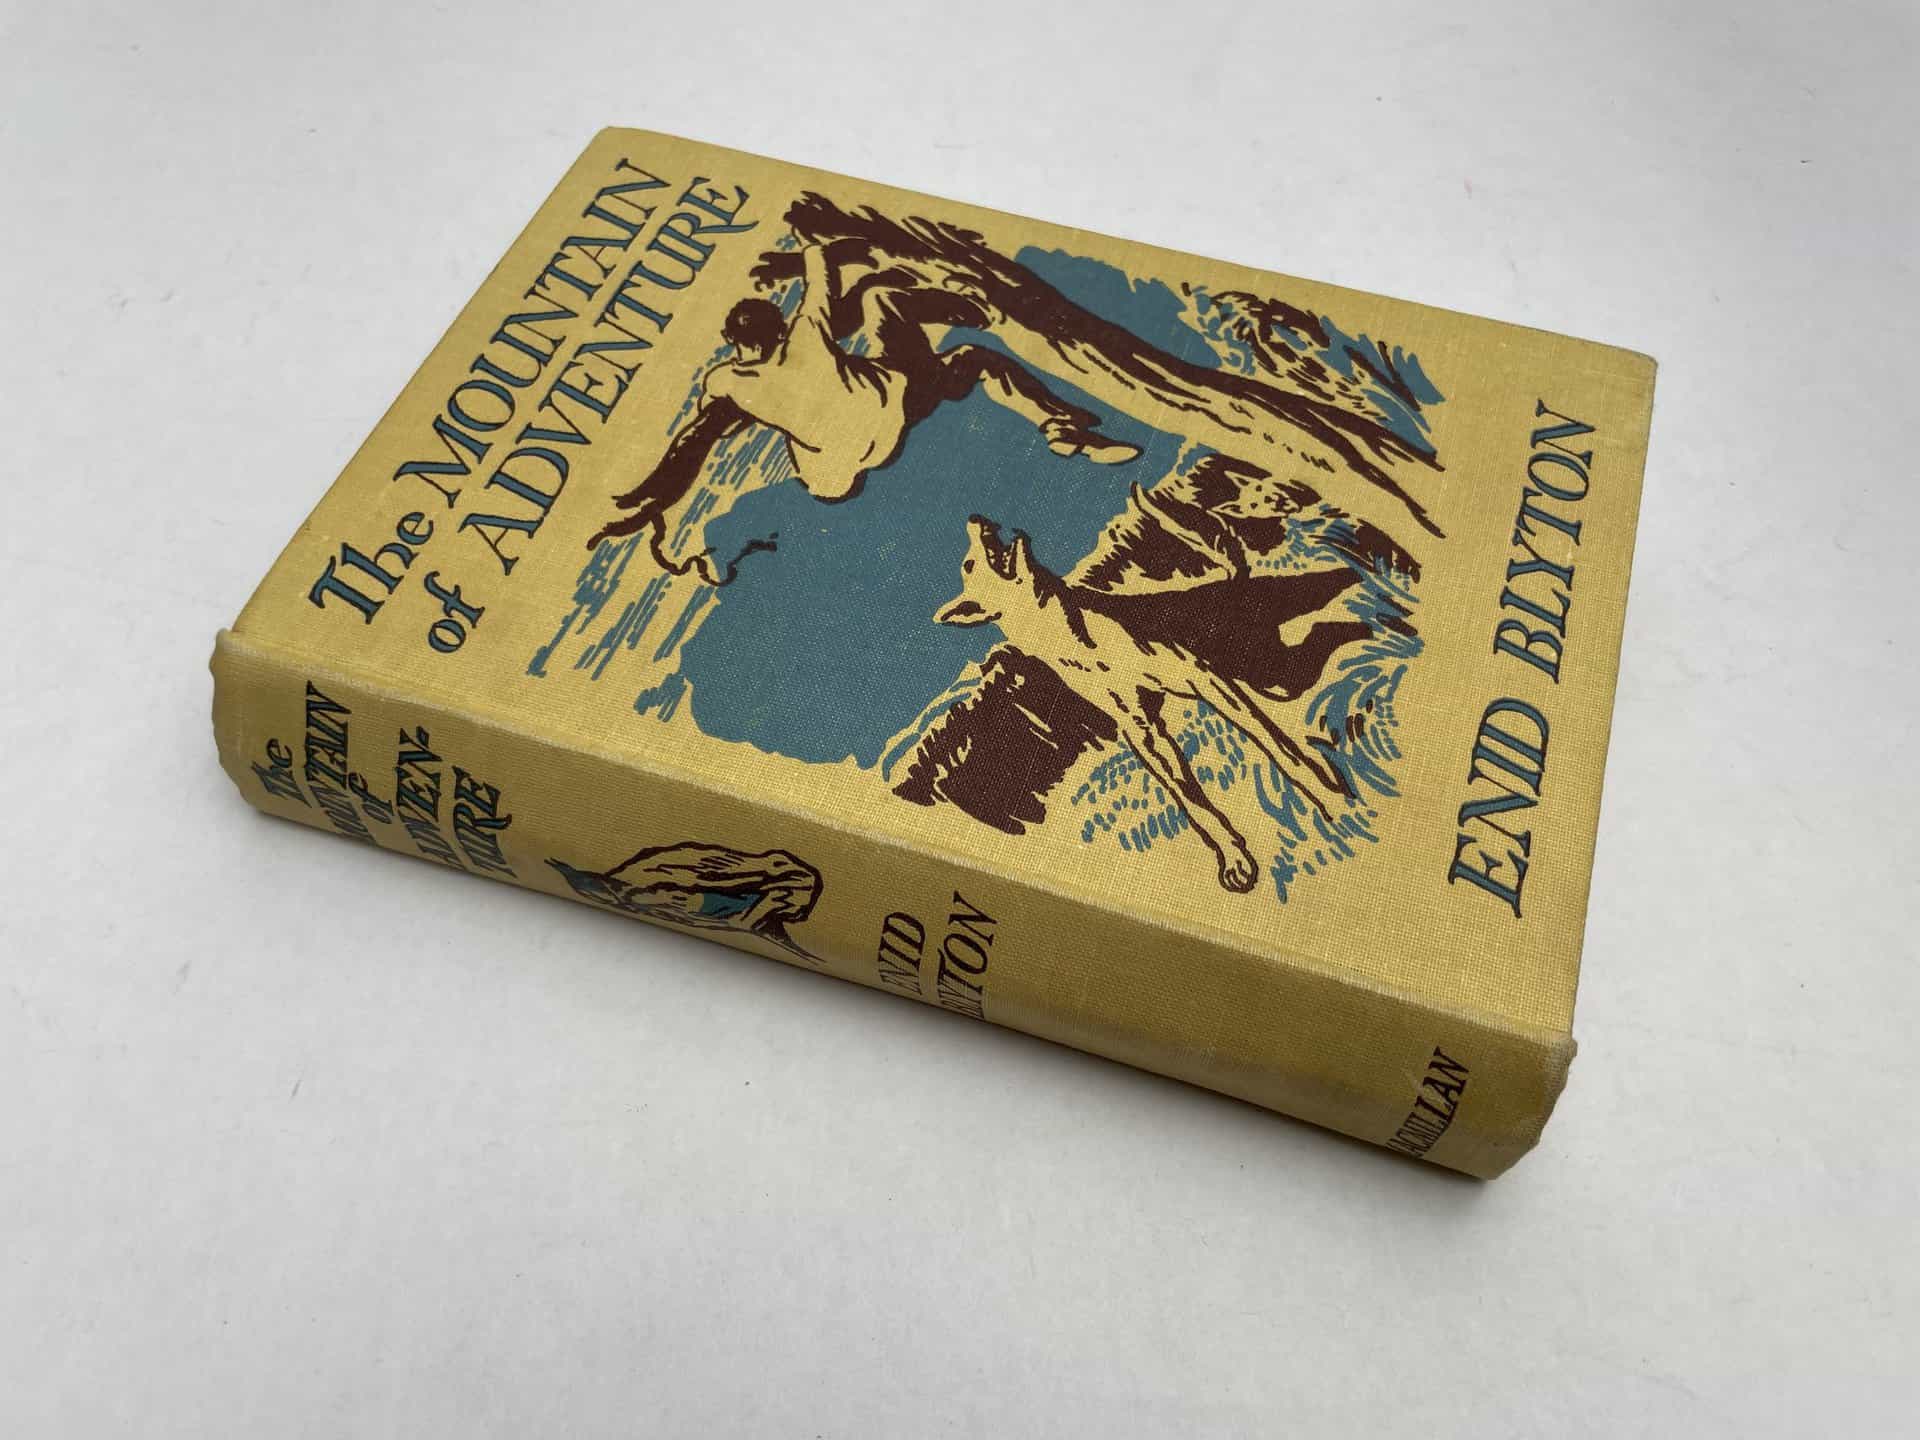 enid blyton the mountain of adventure first edition4